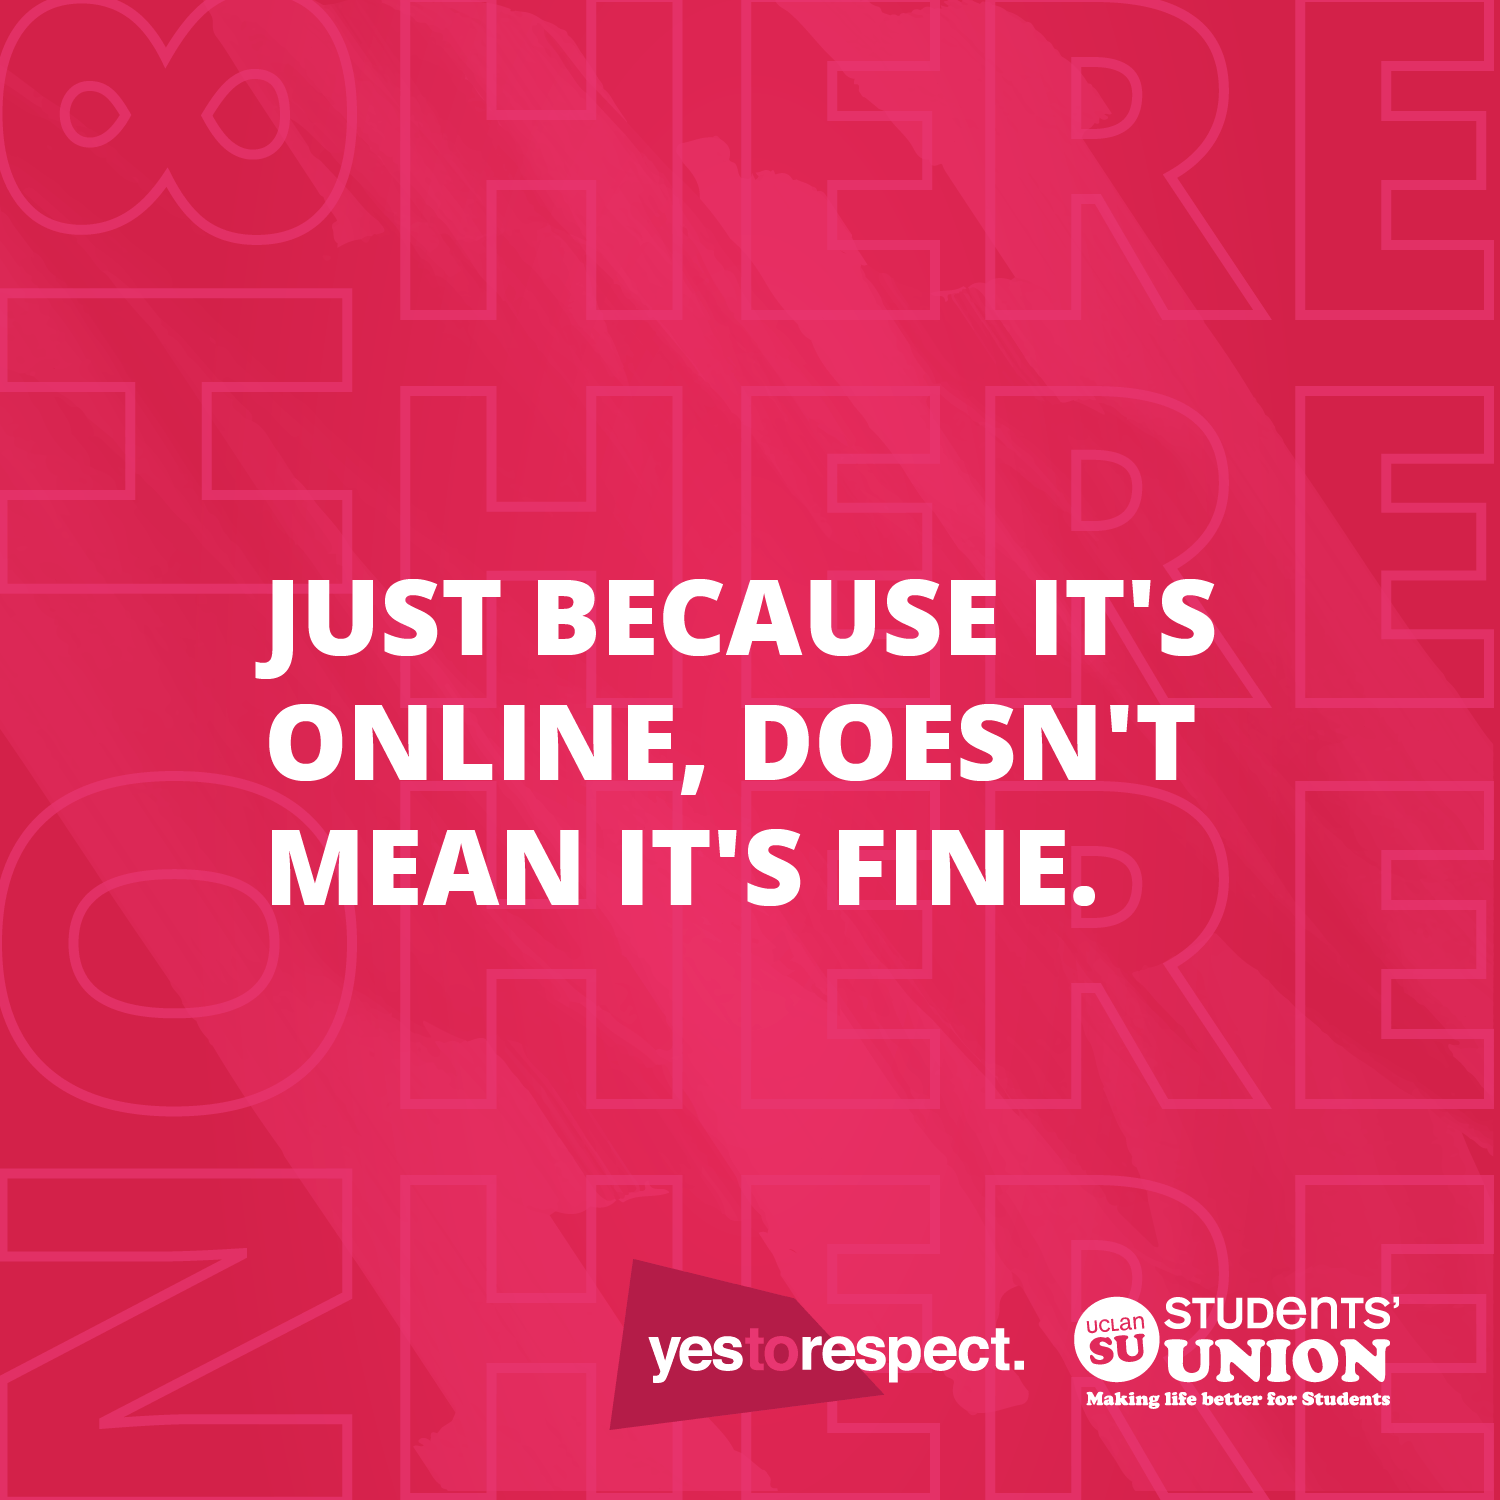 University of Central Lancashire - just because it's online, doesn't mean it's fine